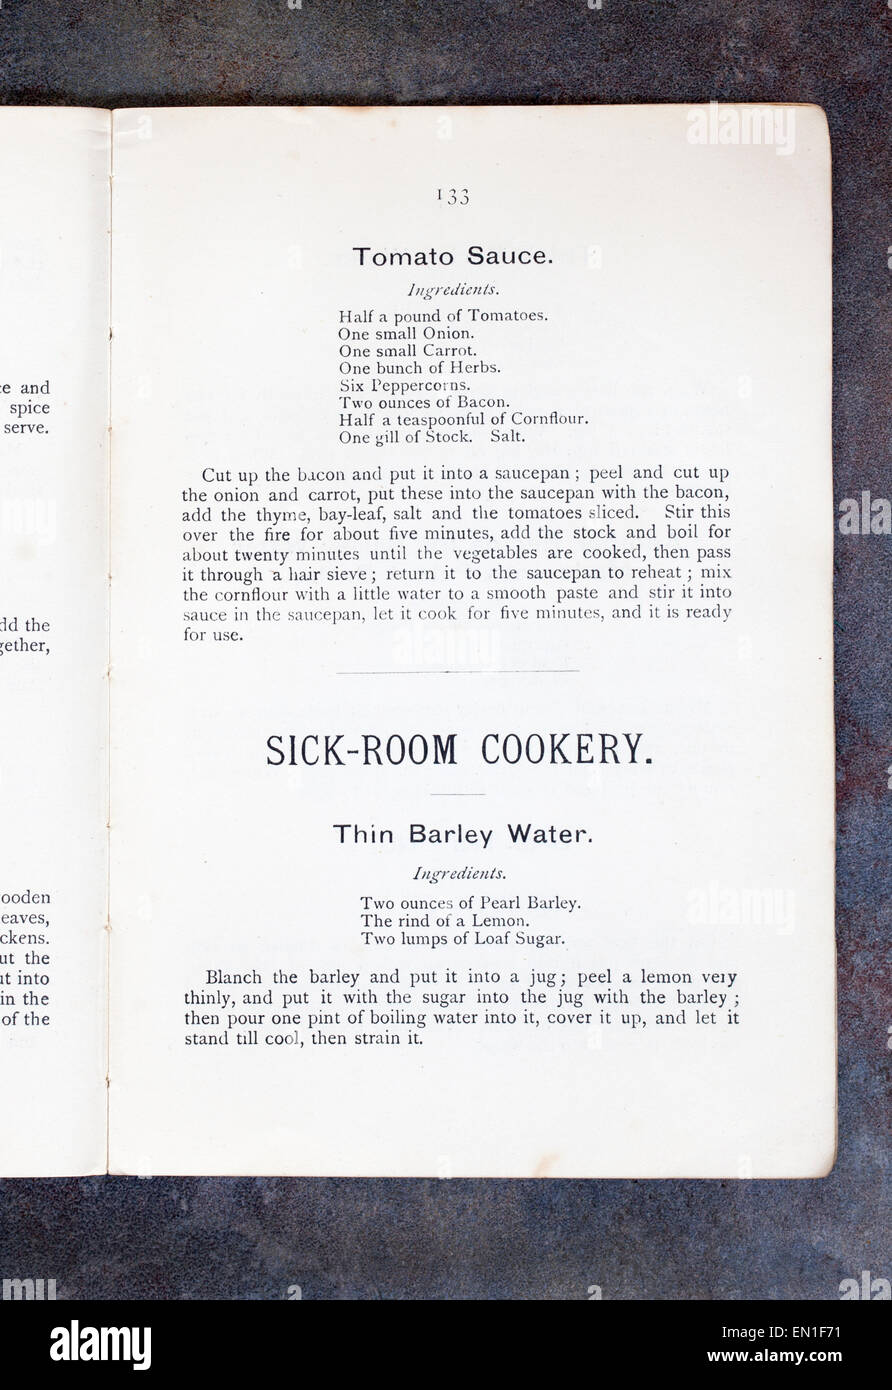 Sick Room Cookery from Plain Cookery Recipes Book by Mrs Charles Clarke for the National Training School for Cookery Stock Photo